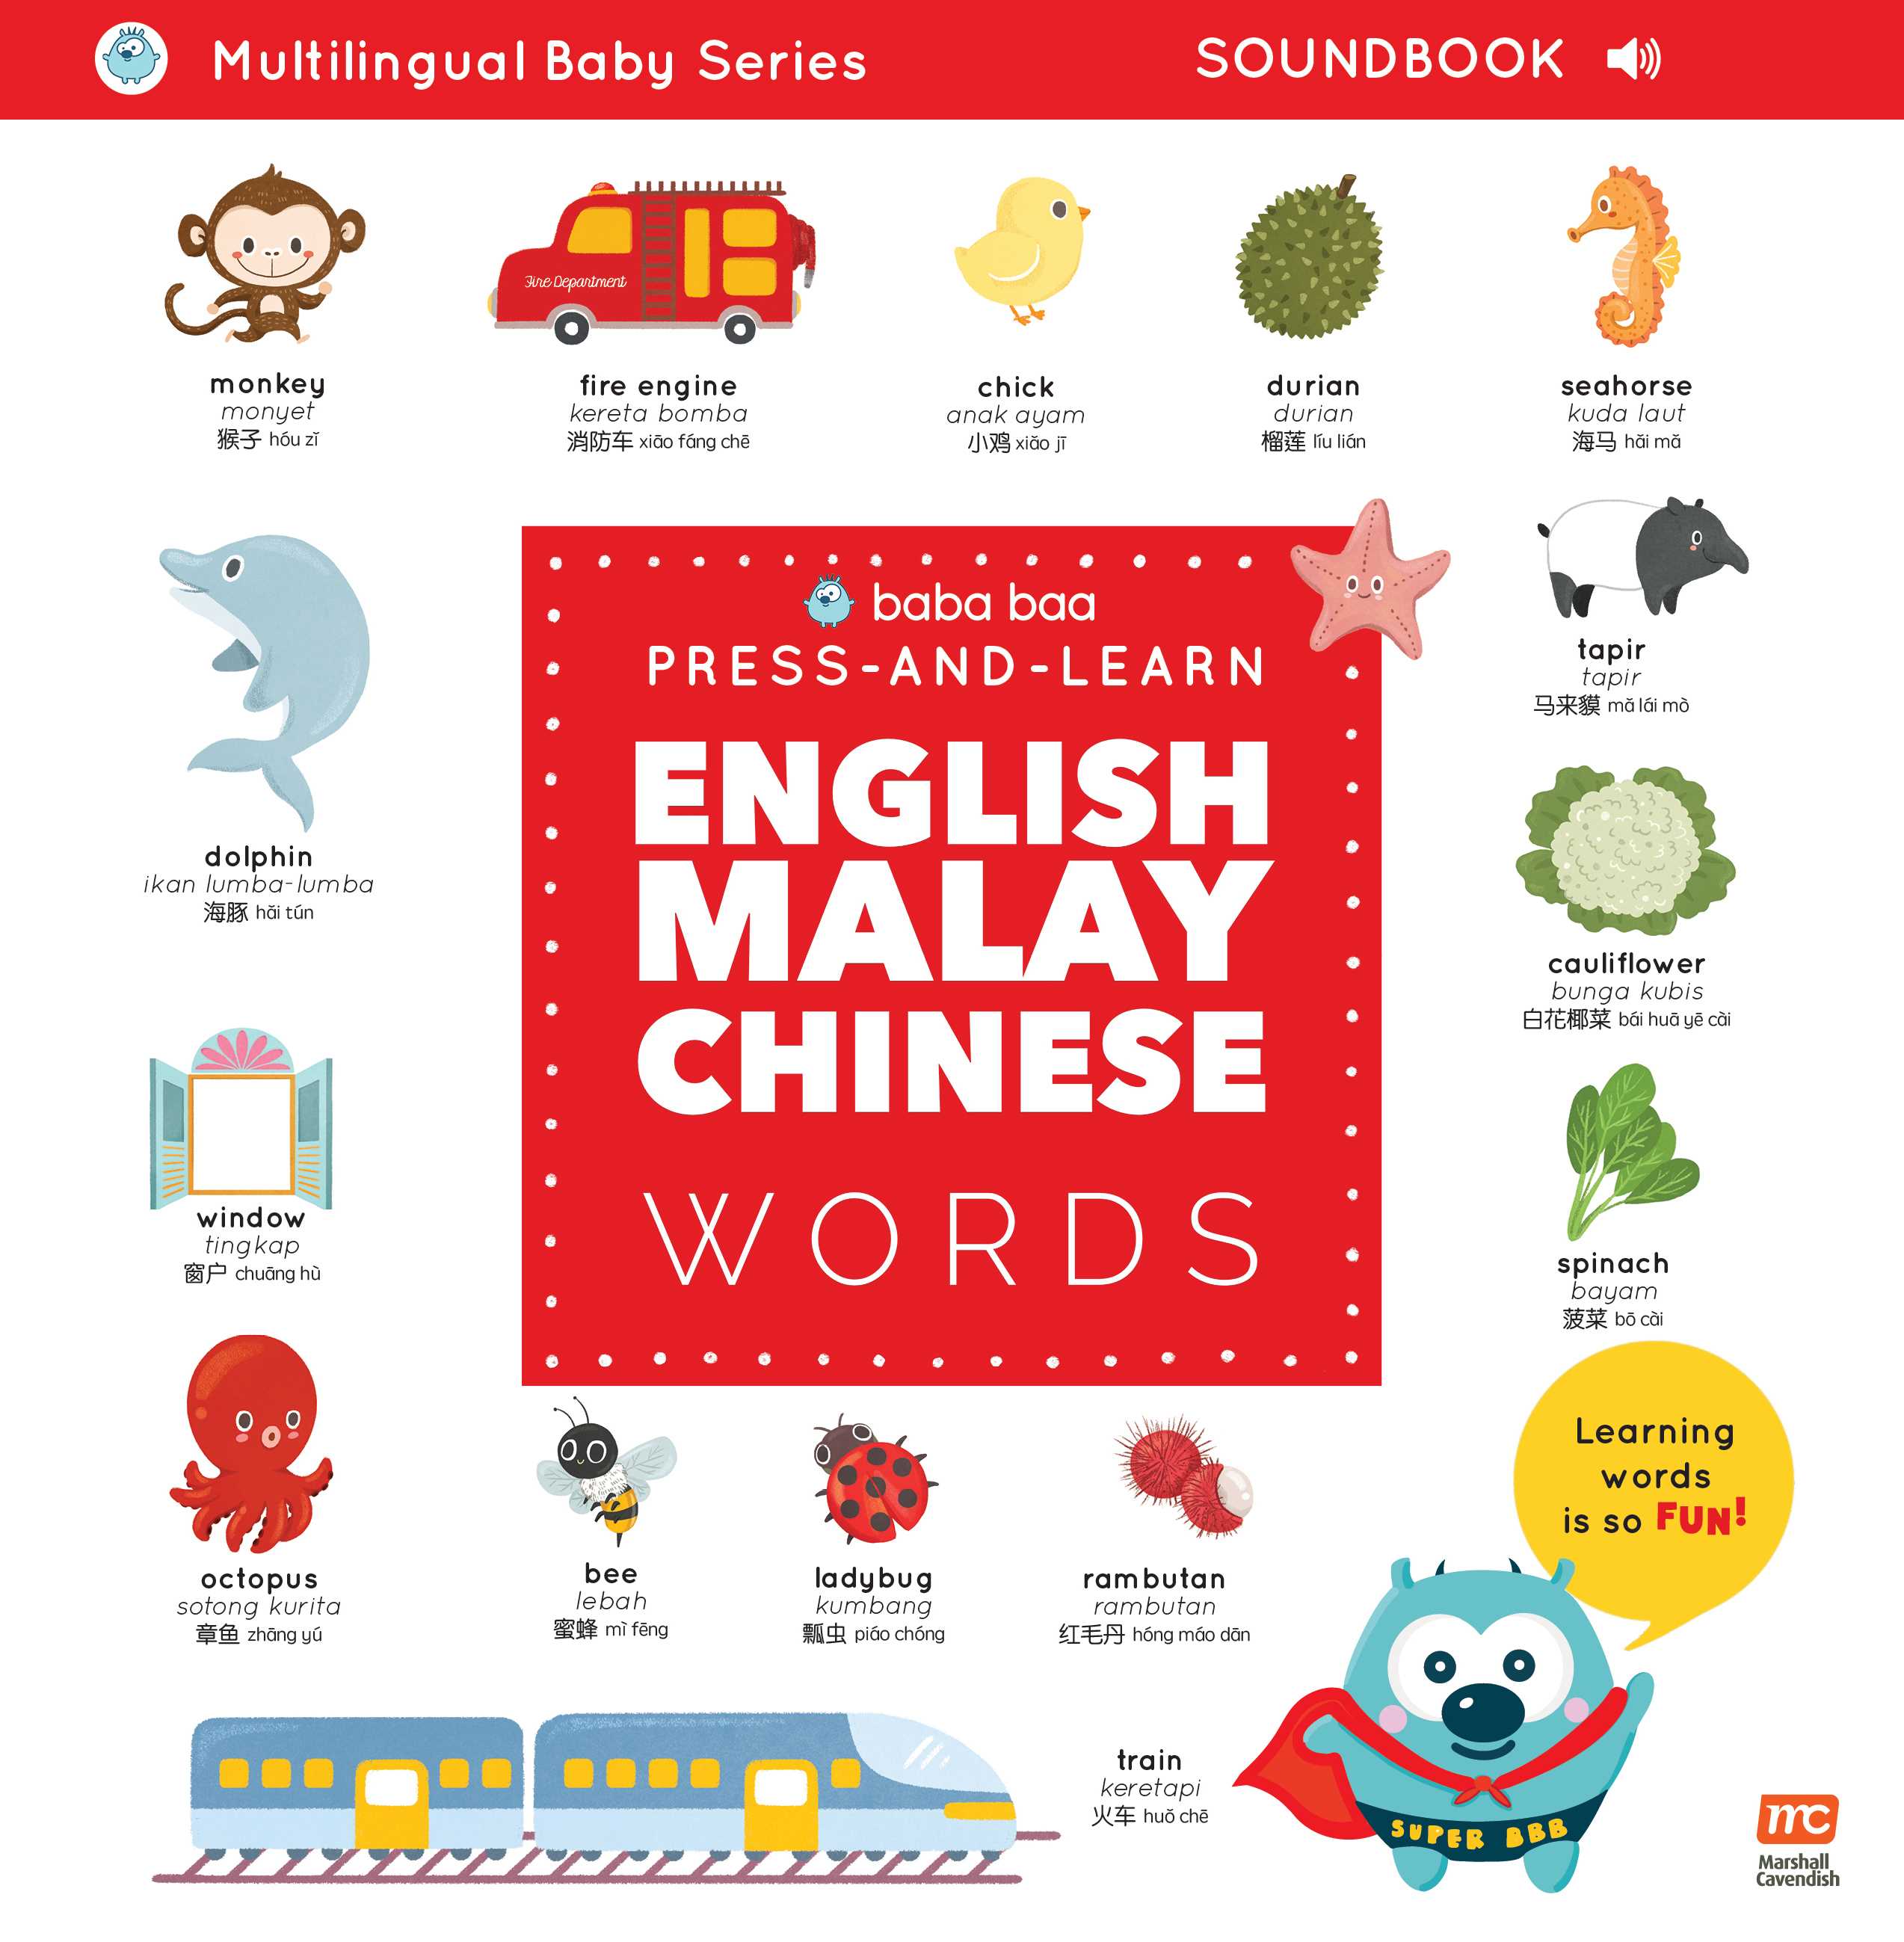 Press-and-Learn: English Malay Chinese Words Sound Book